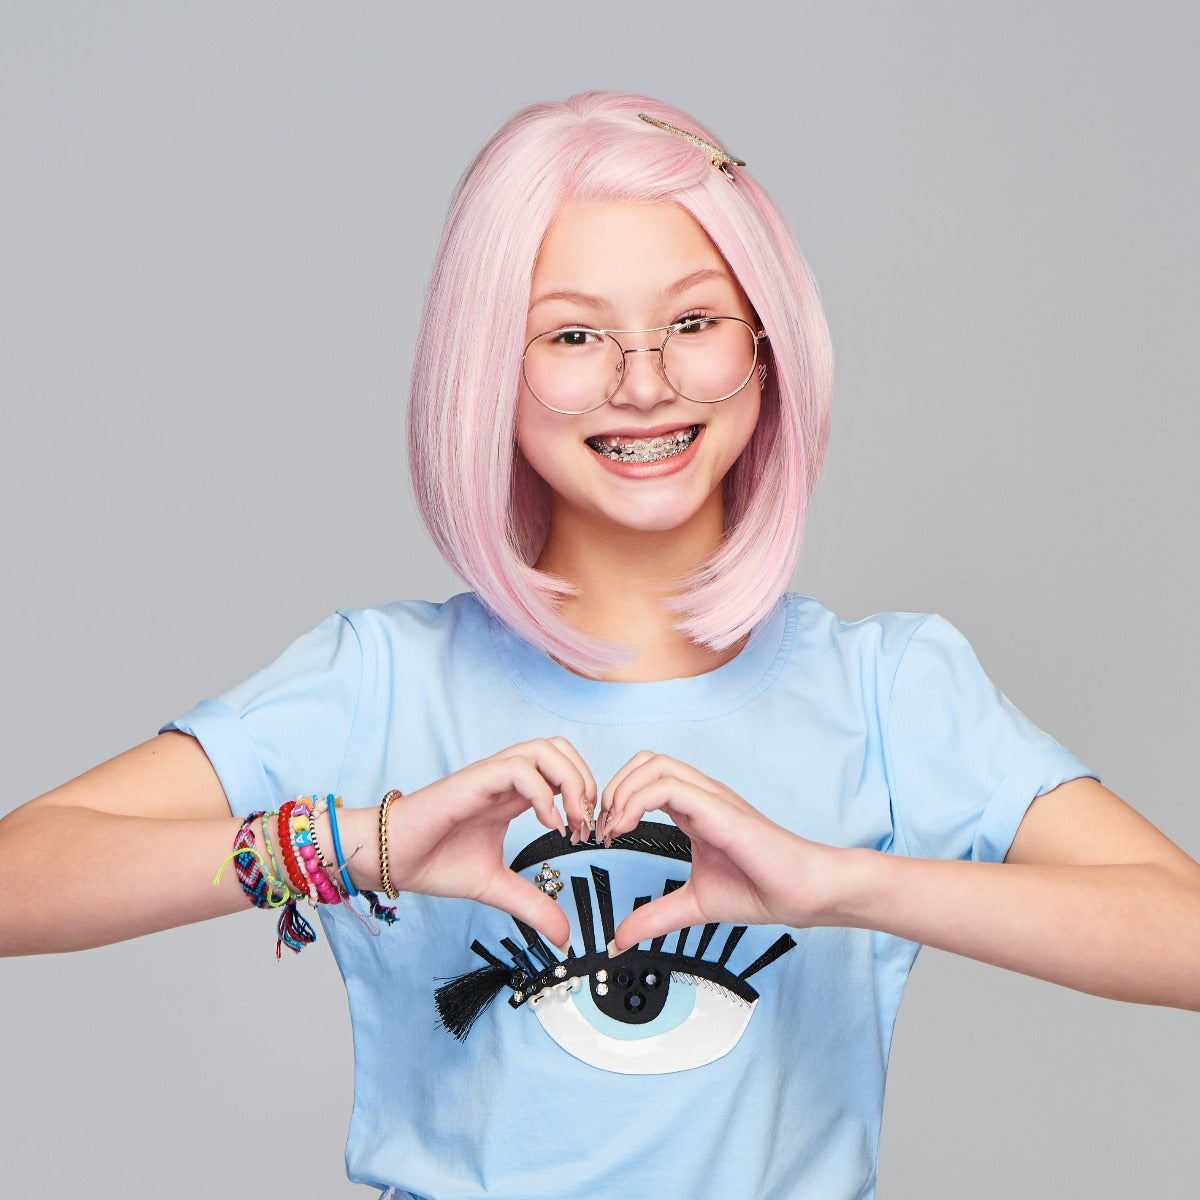 Sweetly Pink - Kidz Collection by Hairdo